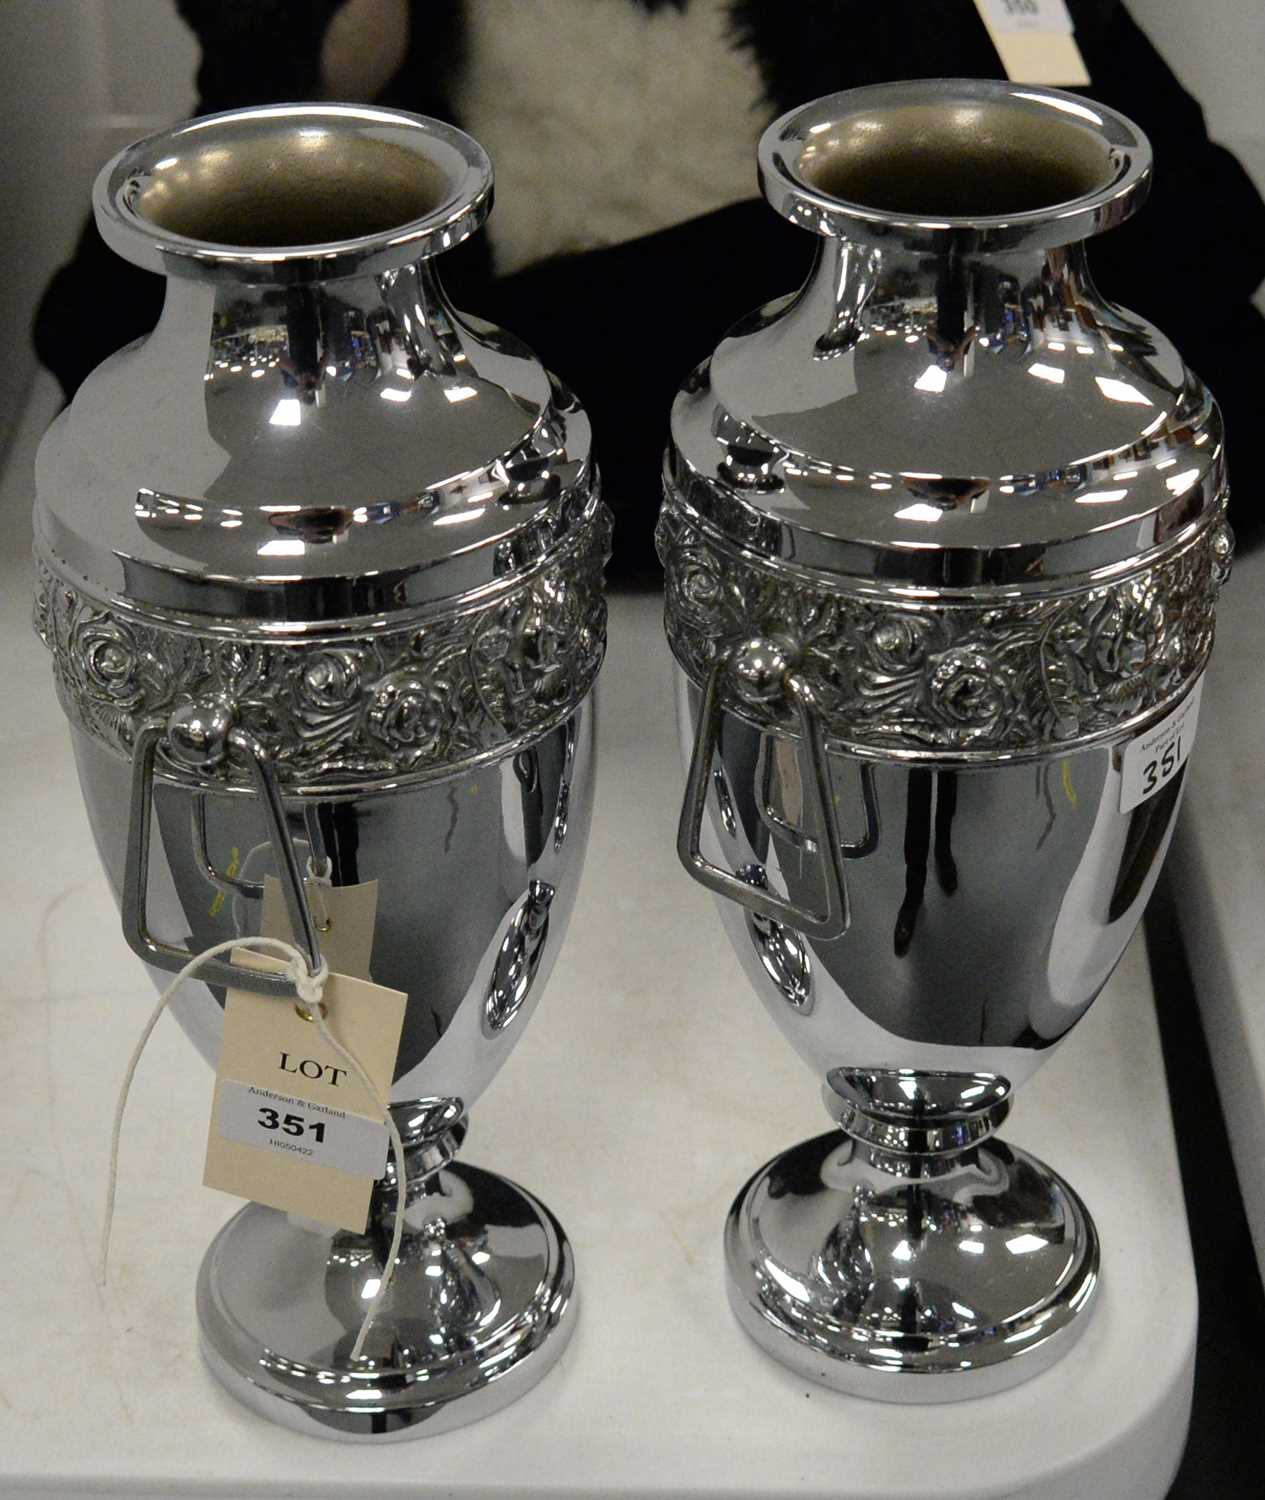 A pair of silver-plated twin-handled urn vases